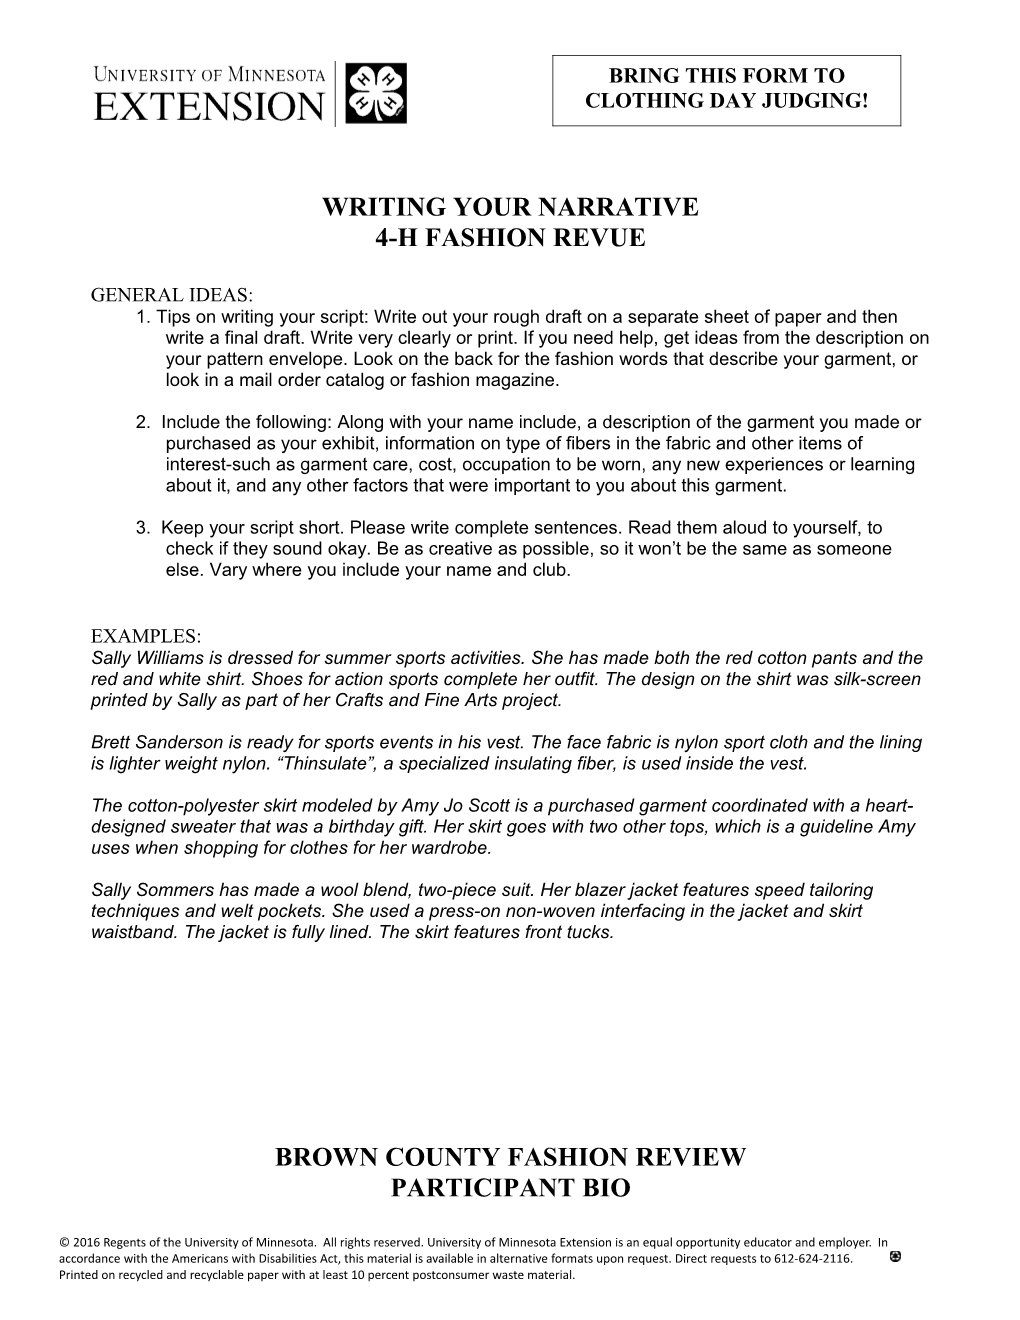 Writing Your Narrative